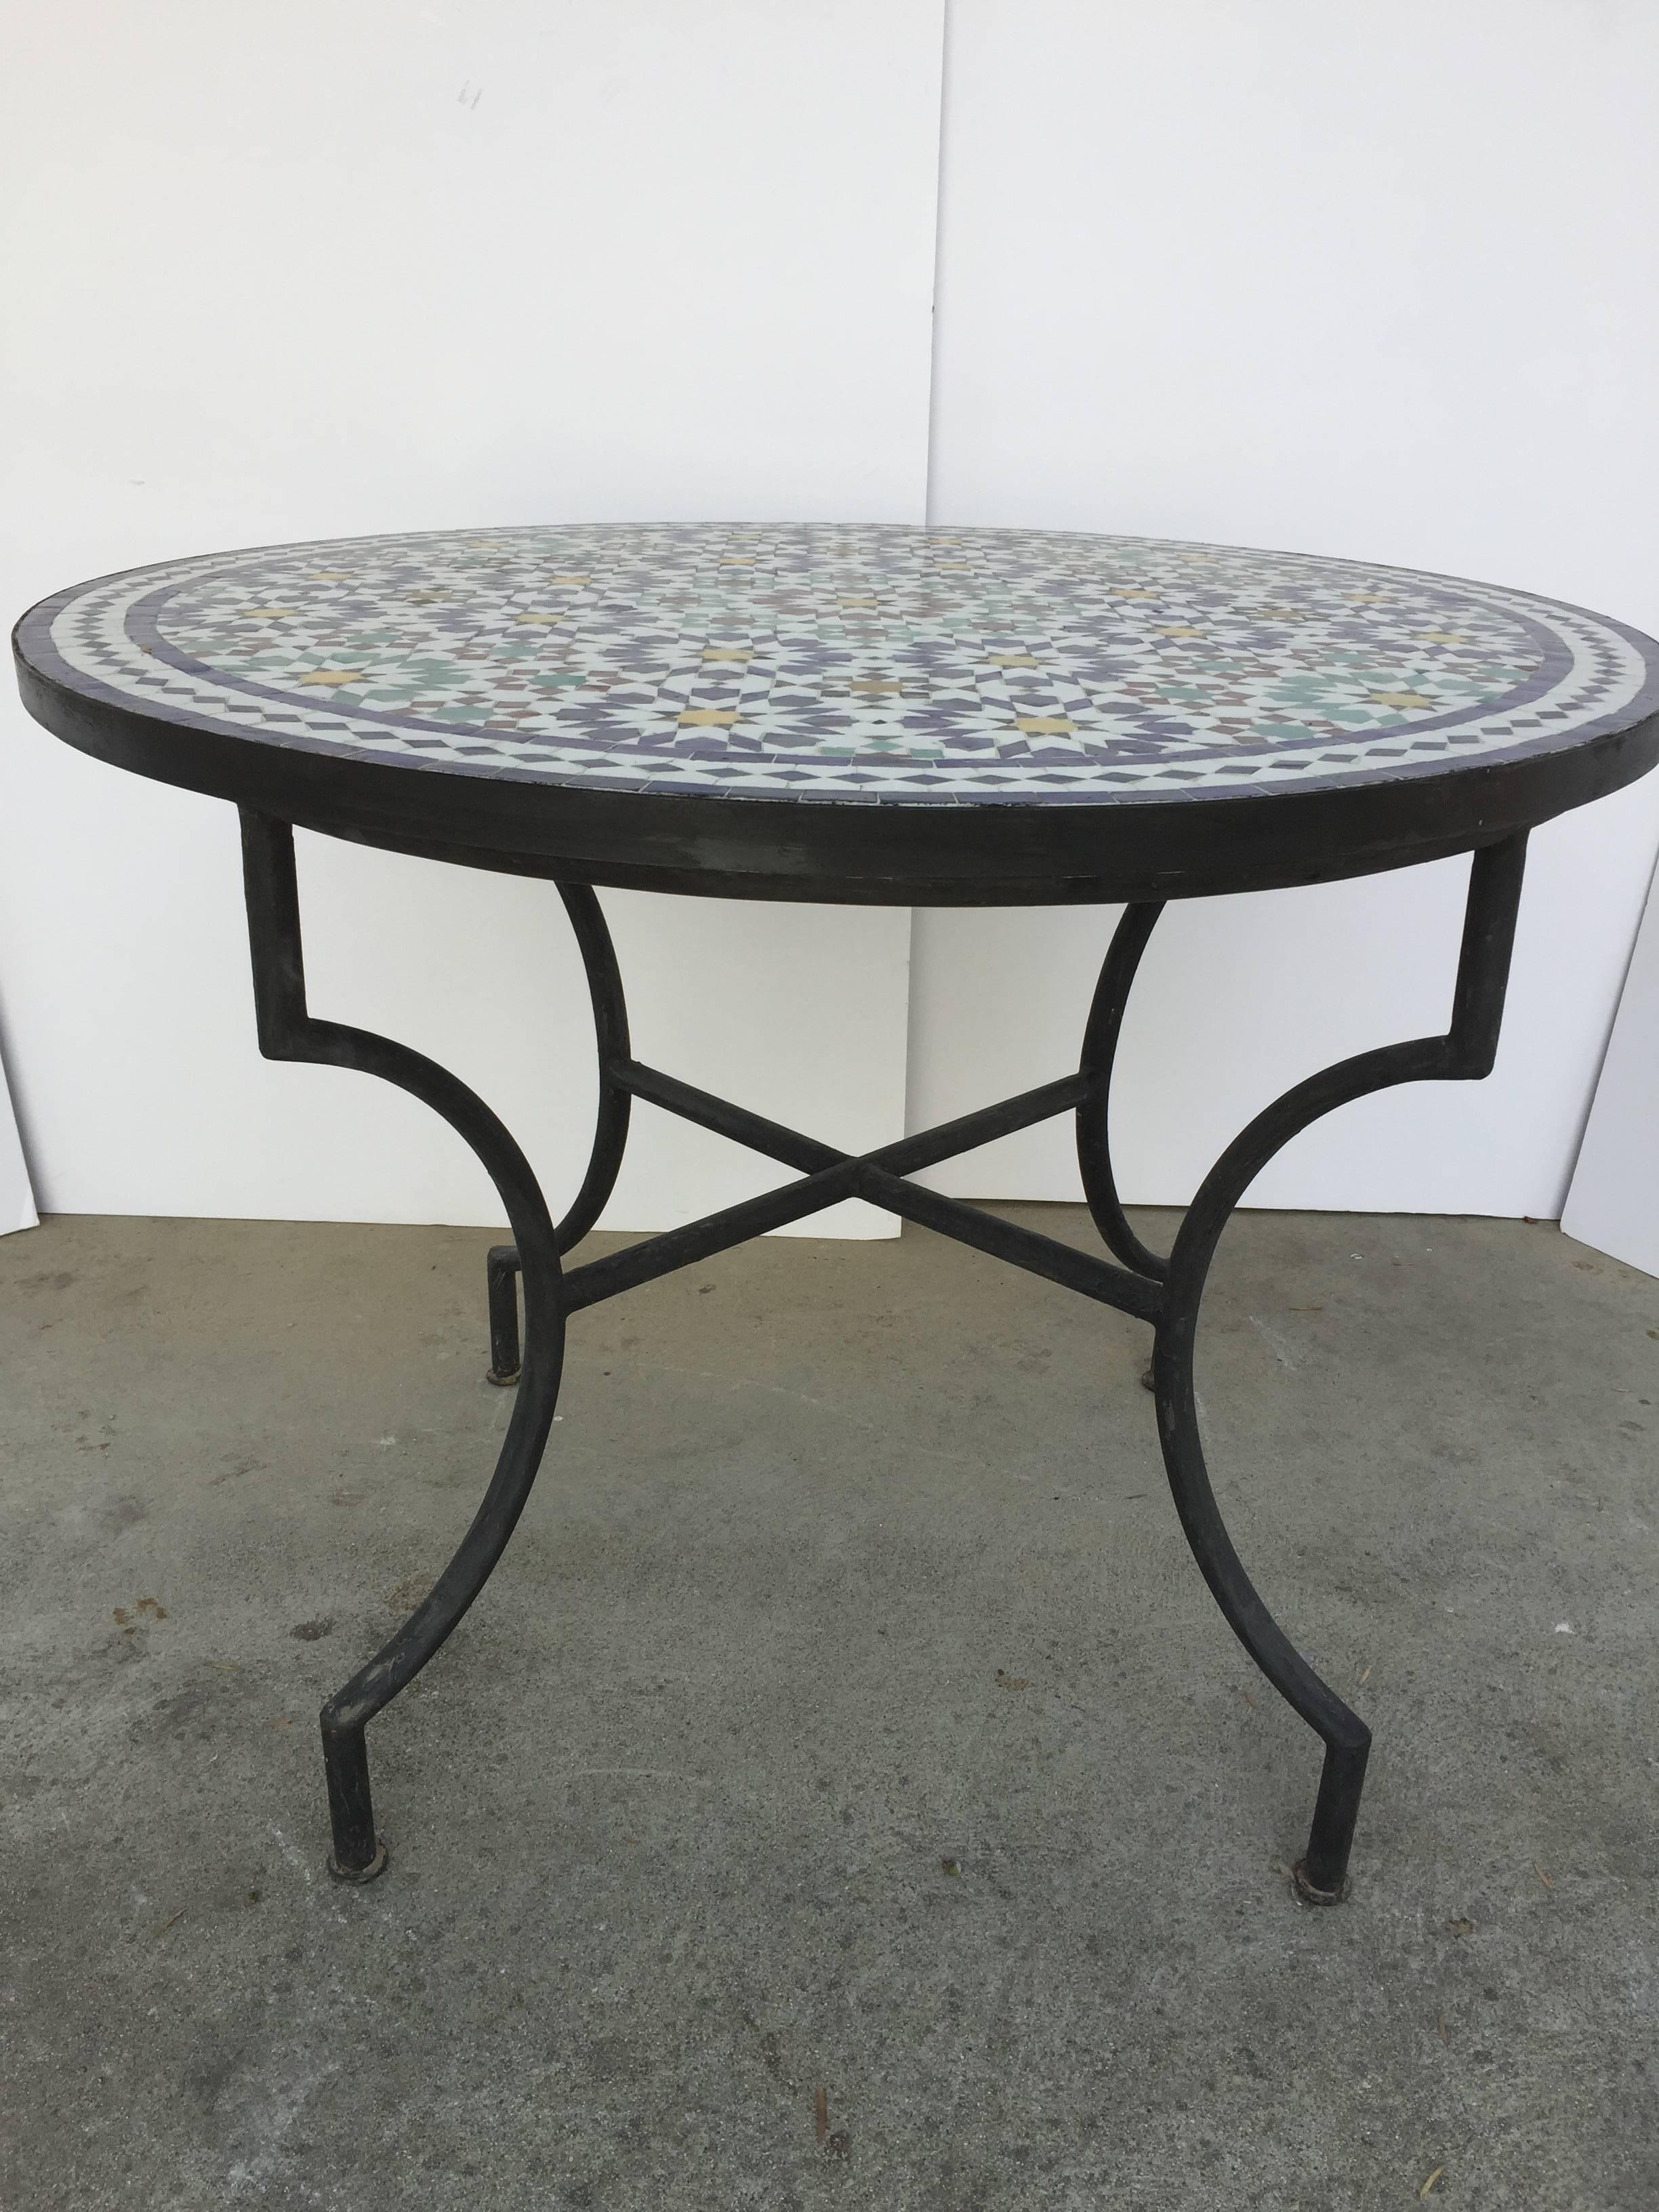 Moroccan Outdoor Mosaic Tile Table from Fez in Traditional Moorish Design In Excellent Condition For Sale In North Hollywood, CA